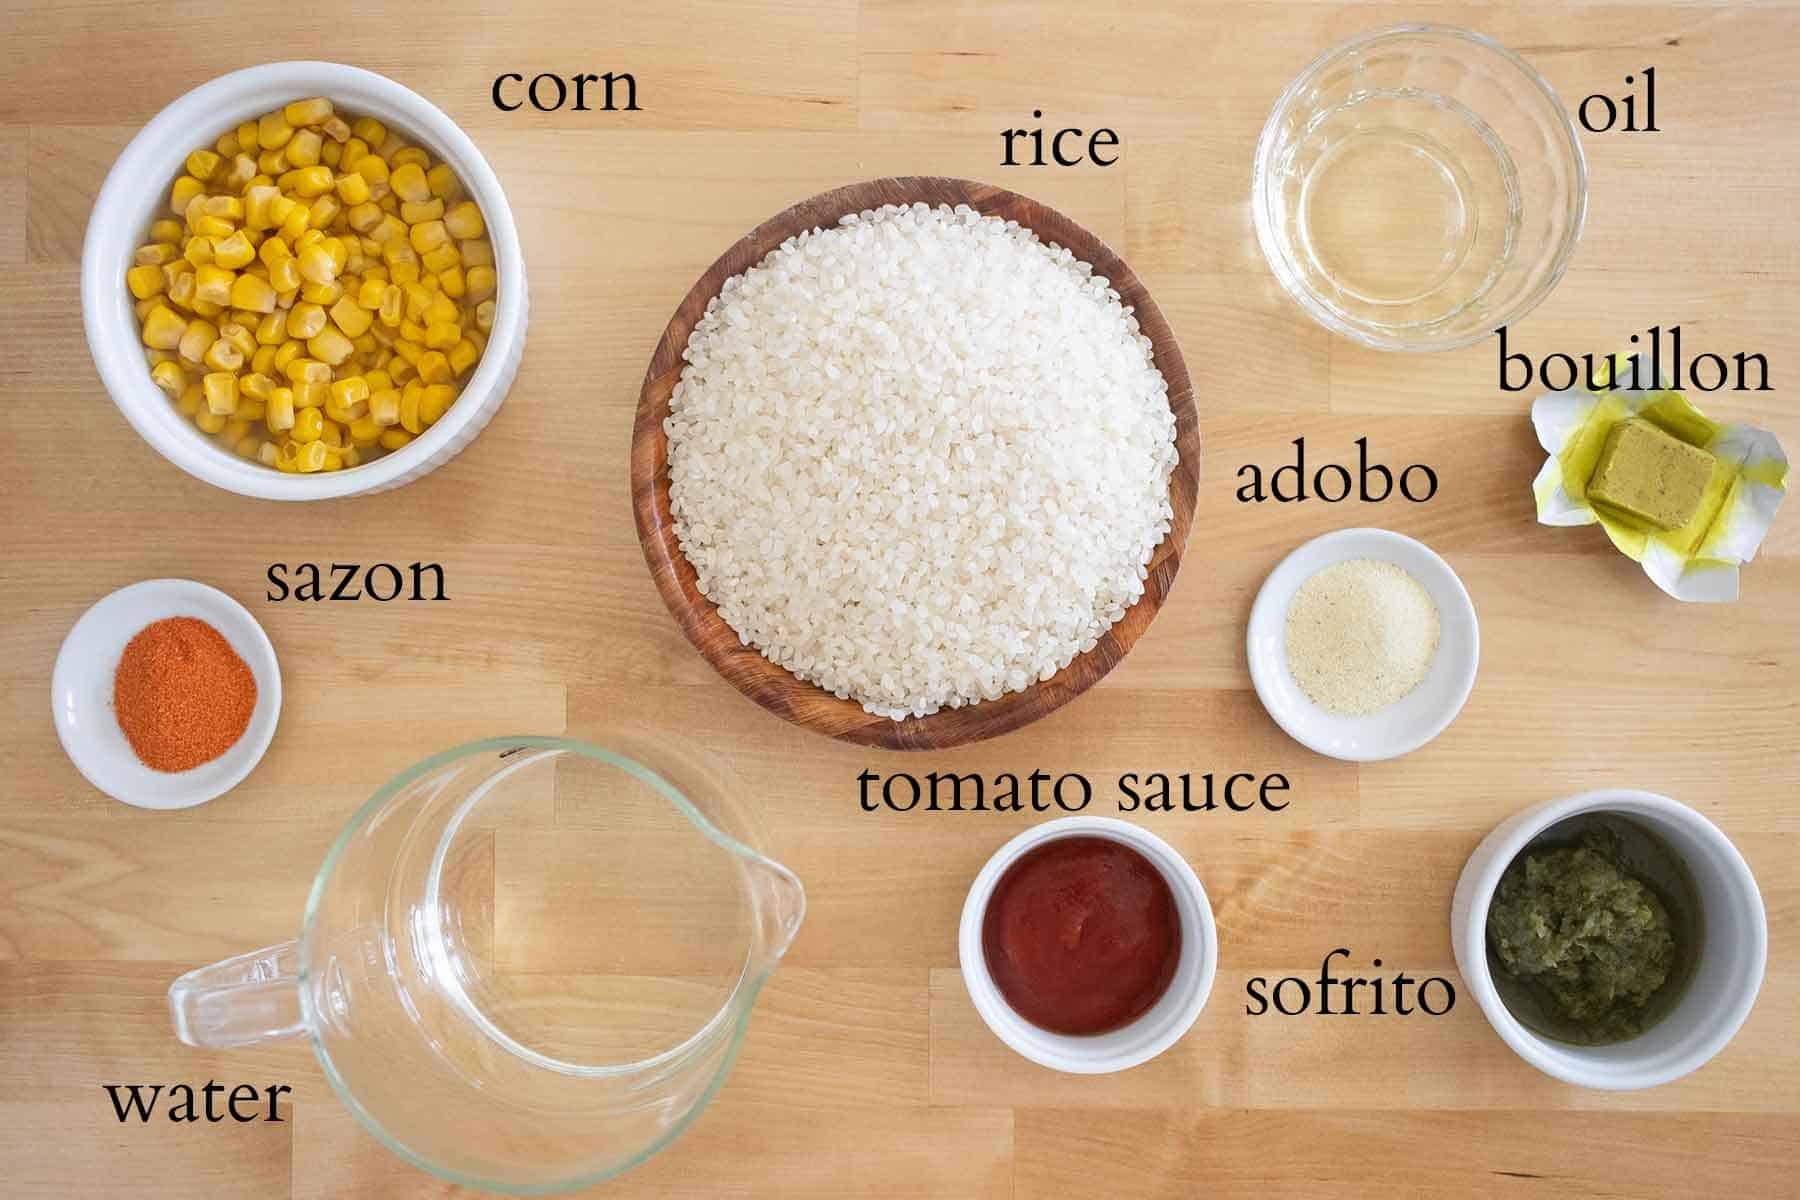 all the ingredients needed to make puerto rican yellow rice with corn.